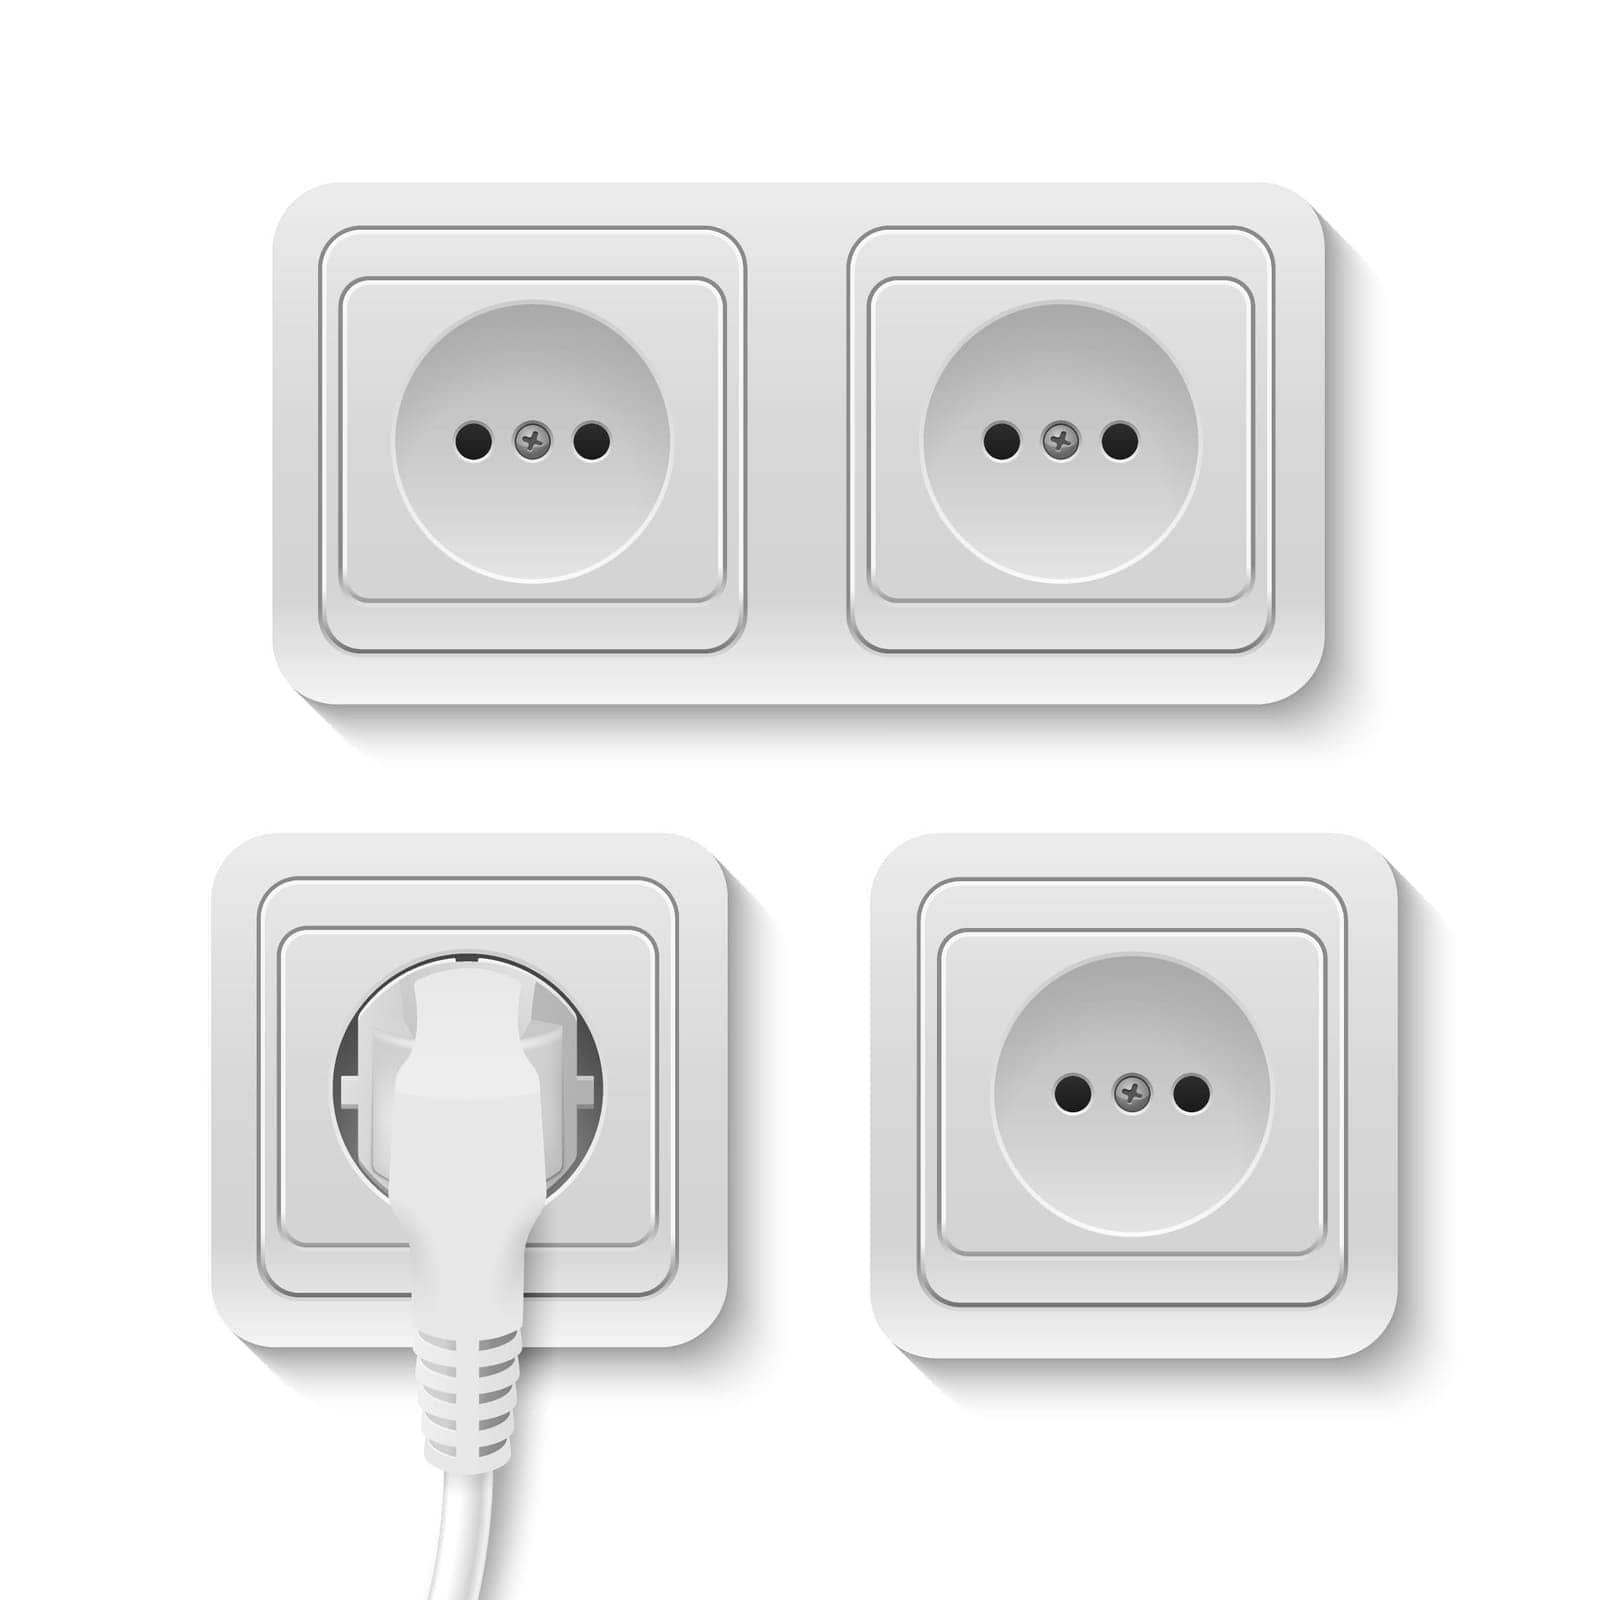 Set of realistic plastic power sockets isolated on white. Vector EPS10 illustration.